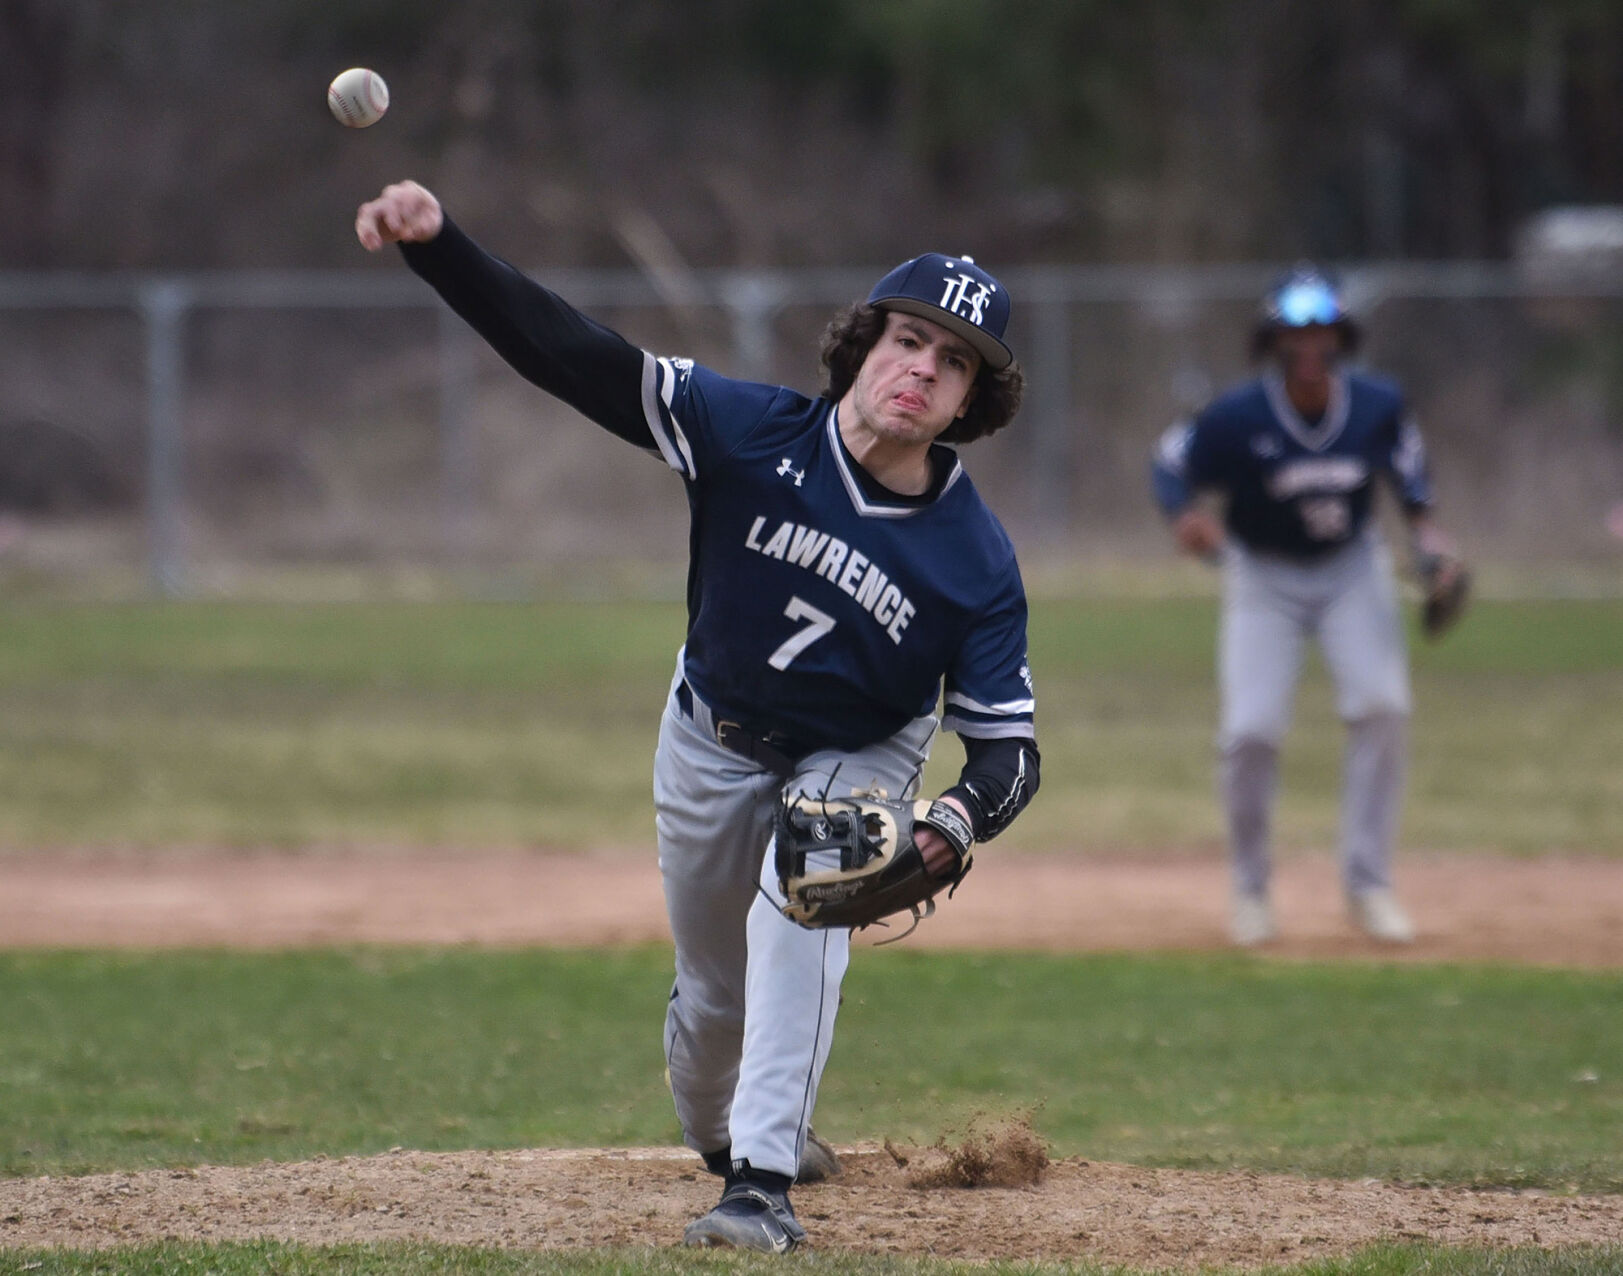 Lawrence triumphs over Methuen in high school baseball showdown with strong offensive showing